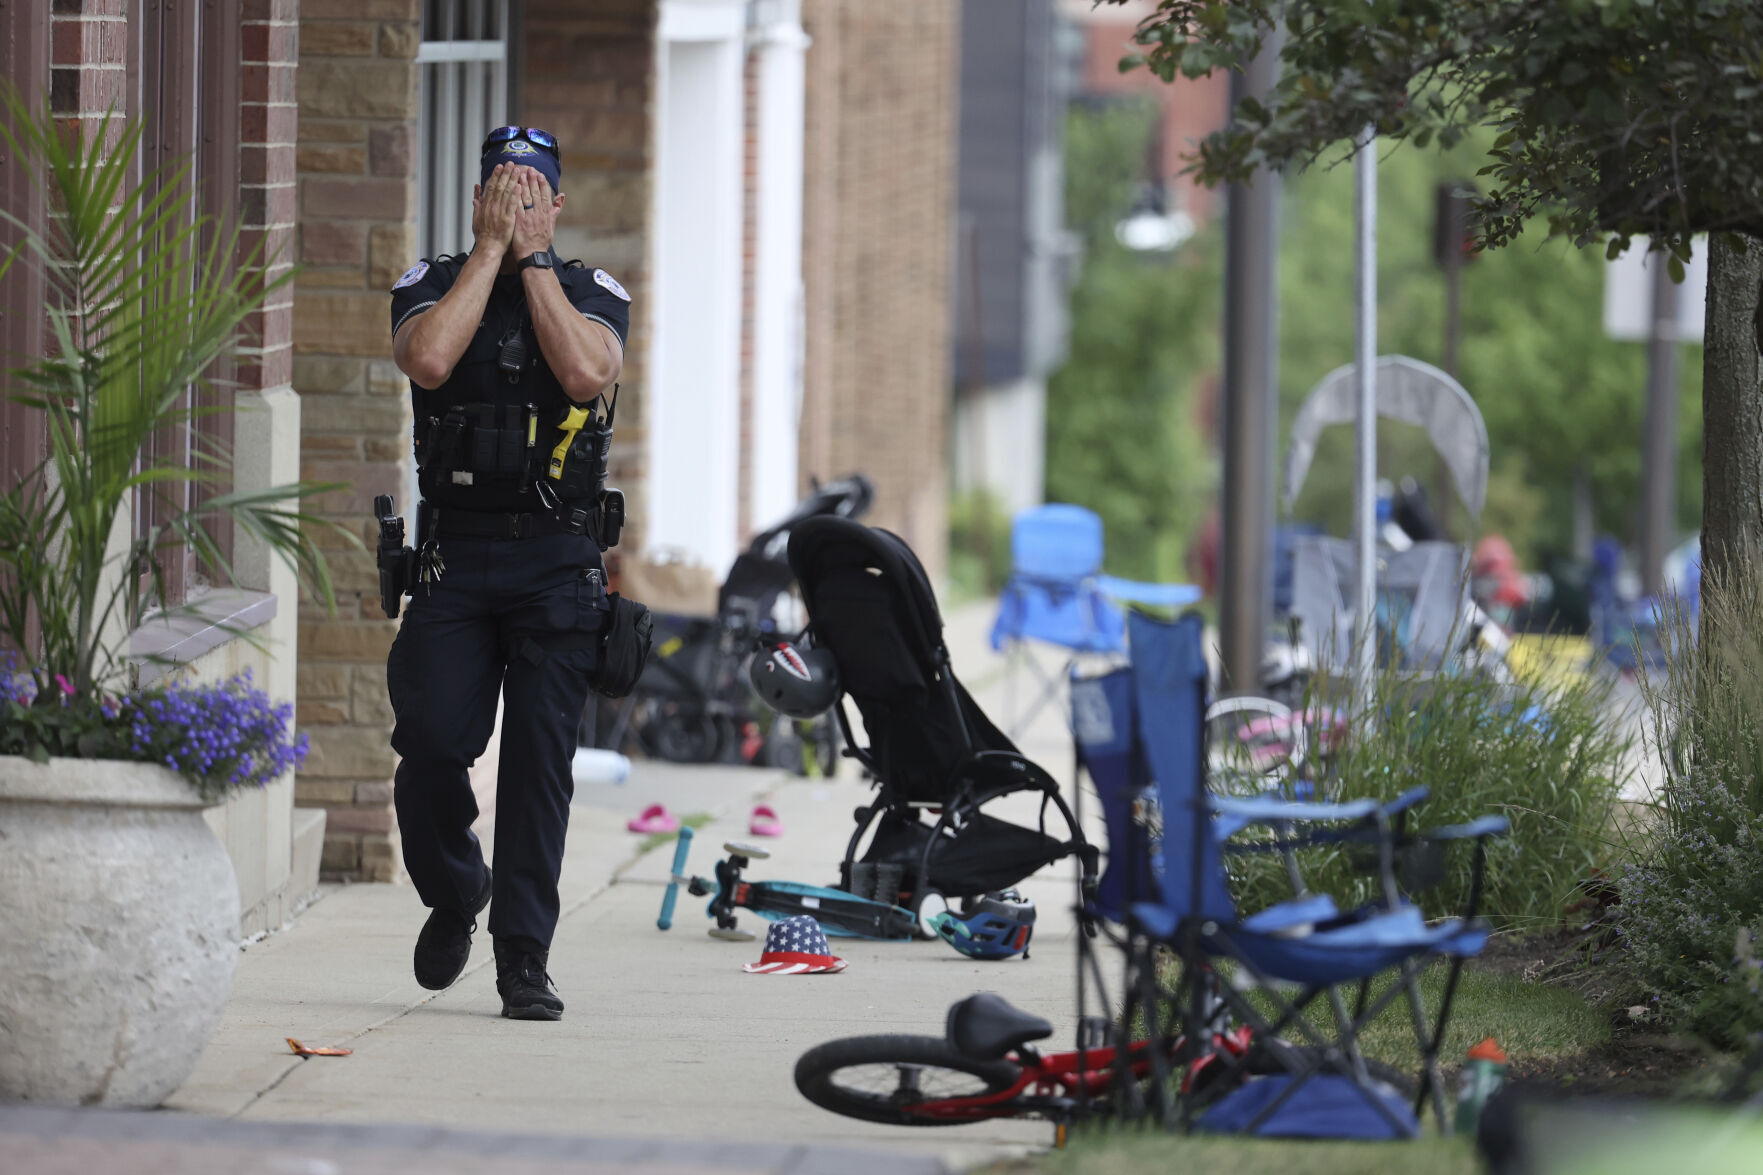 Update Police find man suspected in shooting at Chicago-area parade Local News hjnews image